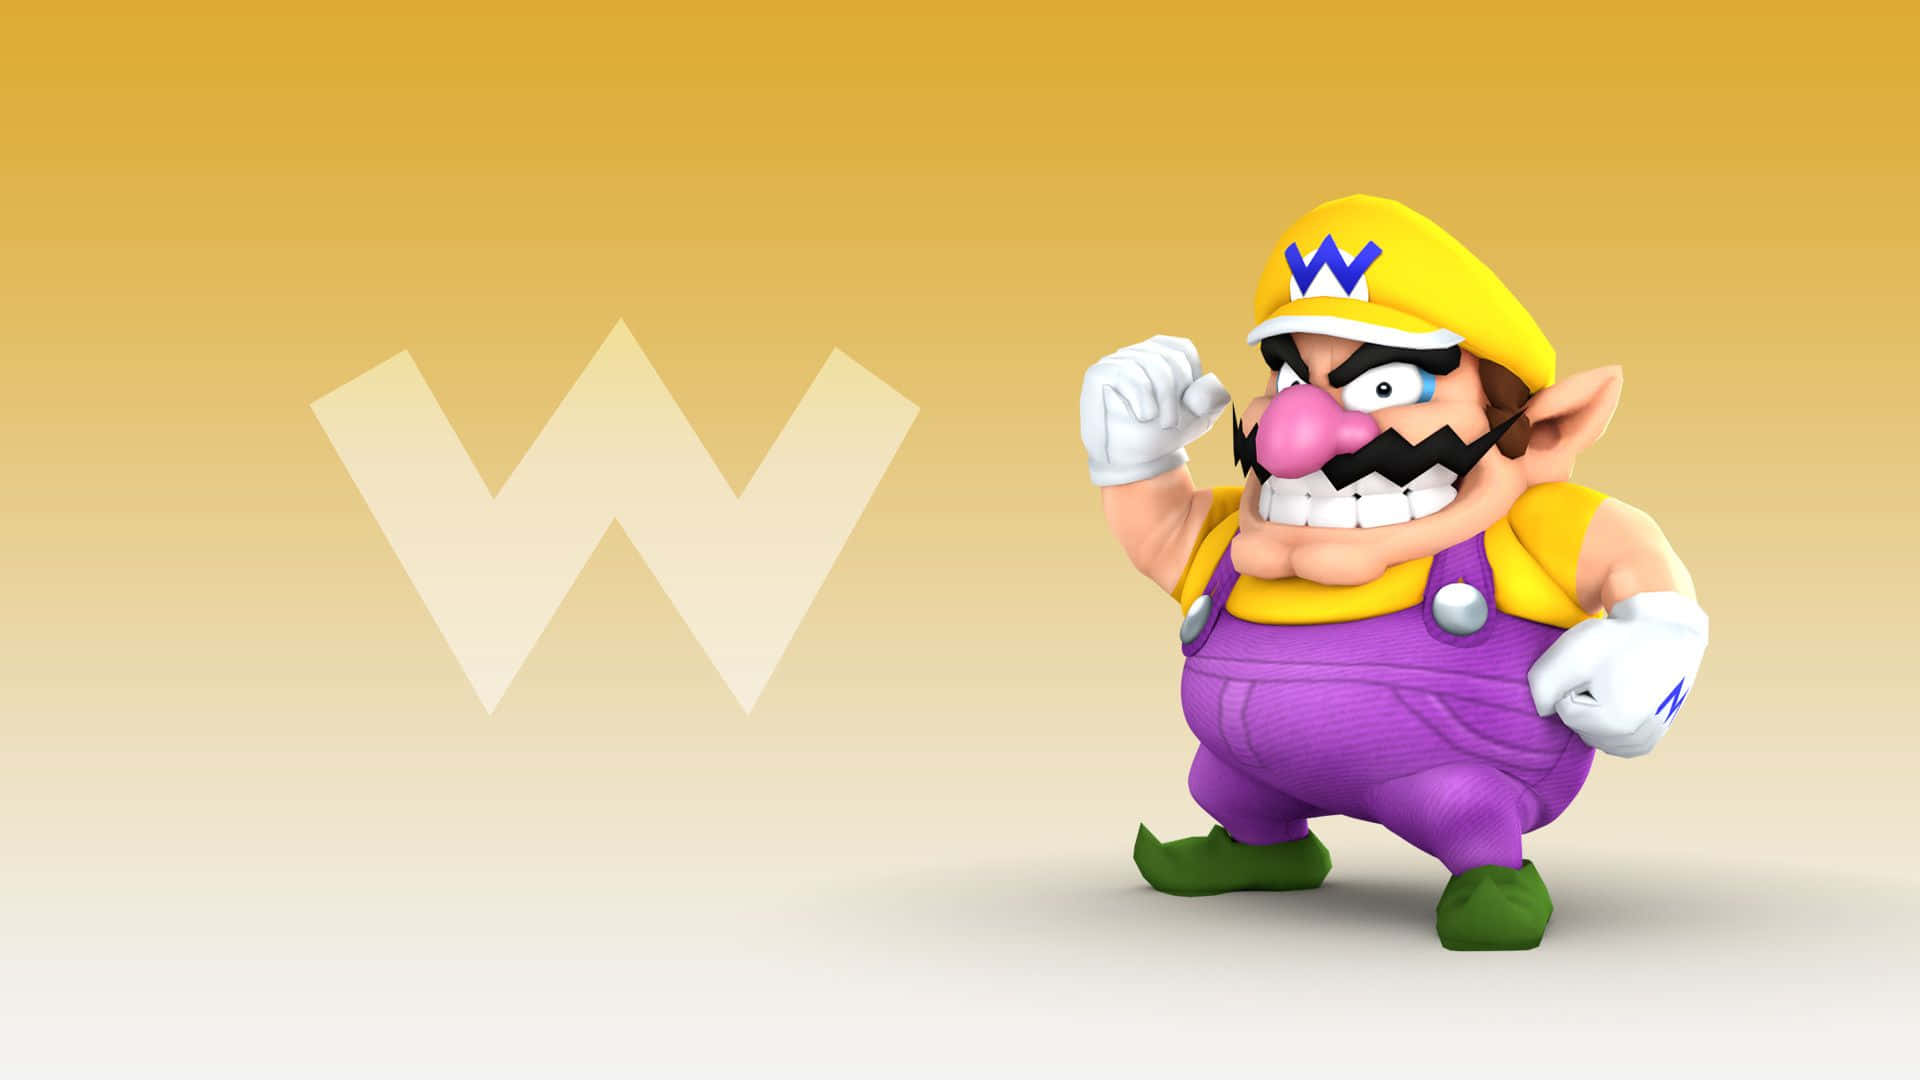 Wario Striking A Pose In The World Of Super Mario